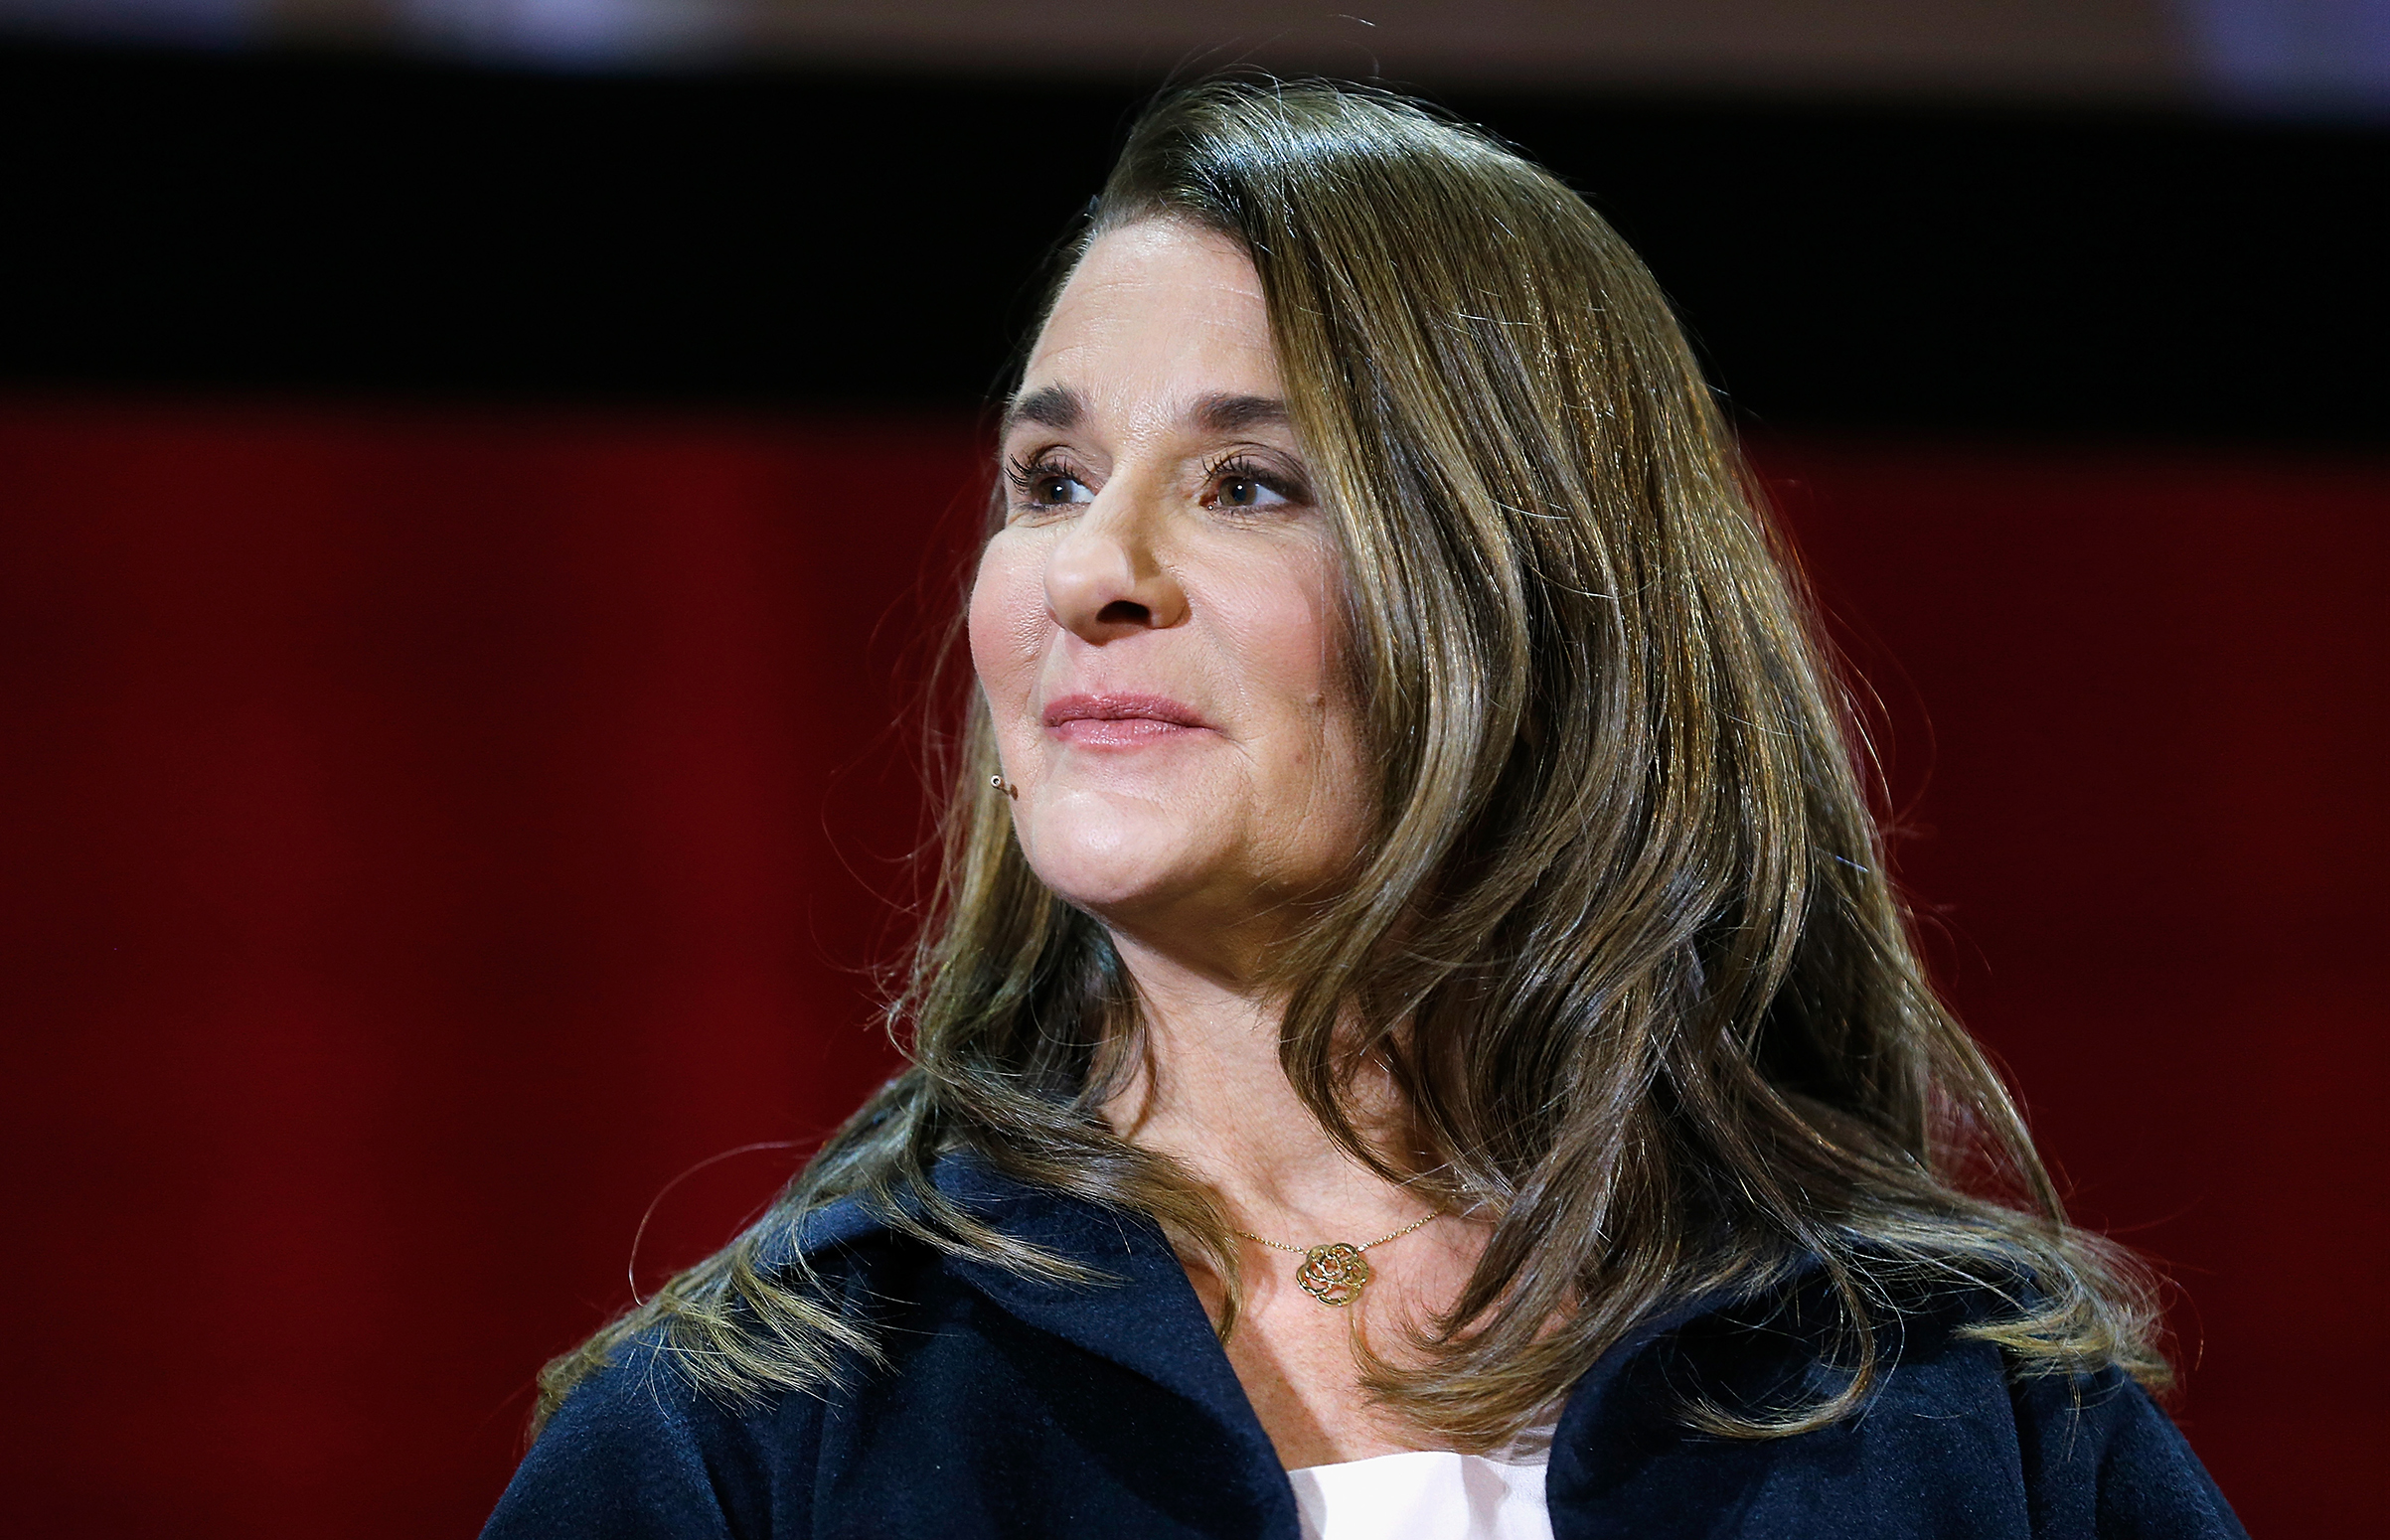 Melinda Gates speaks during an event with  Lin-Manuel Miranda and Bill Gates in February 2018. (John Lamparski—Getty Images)